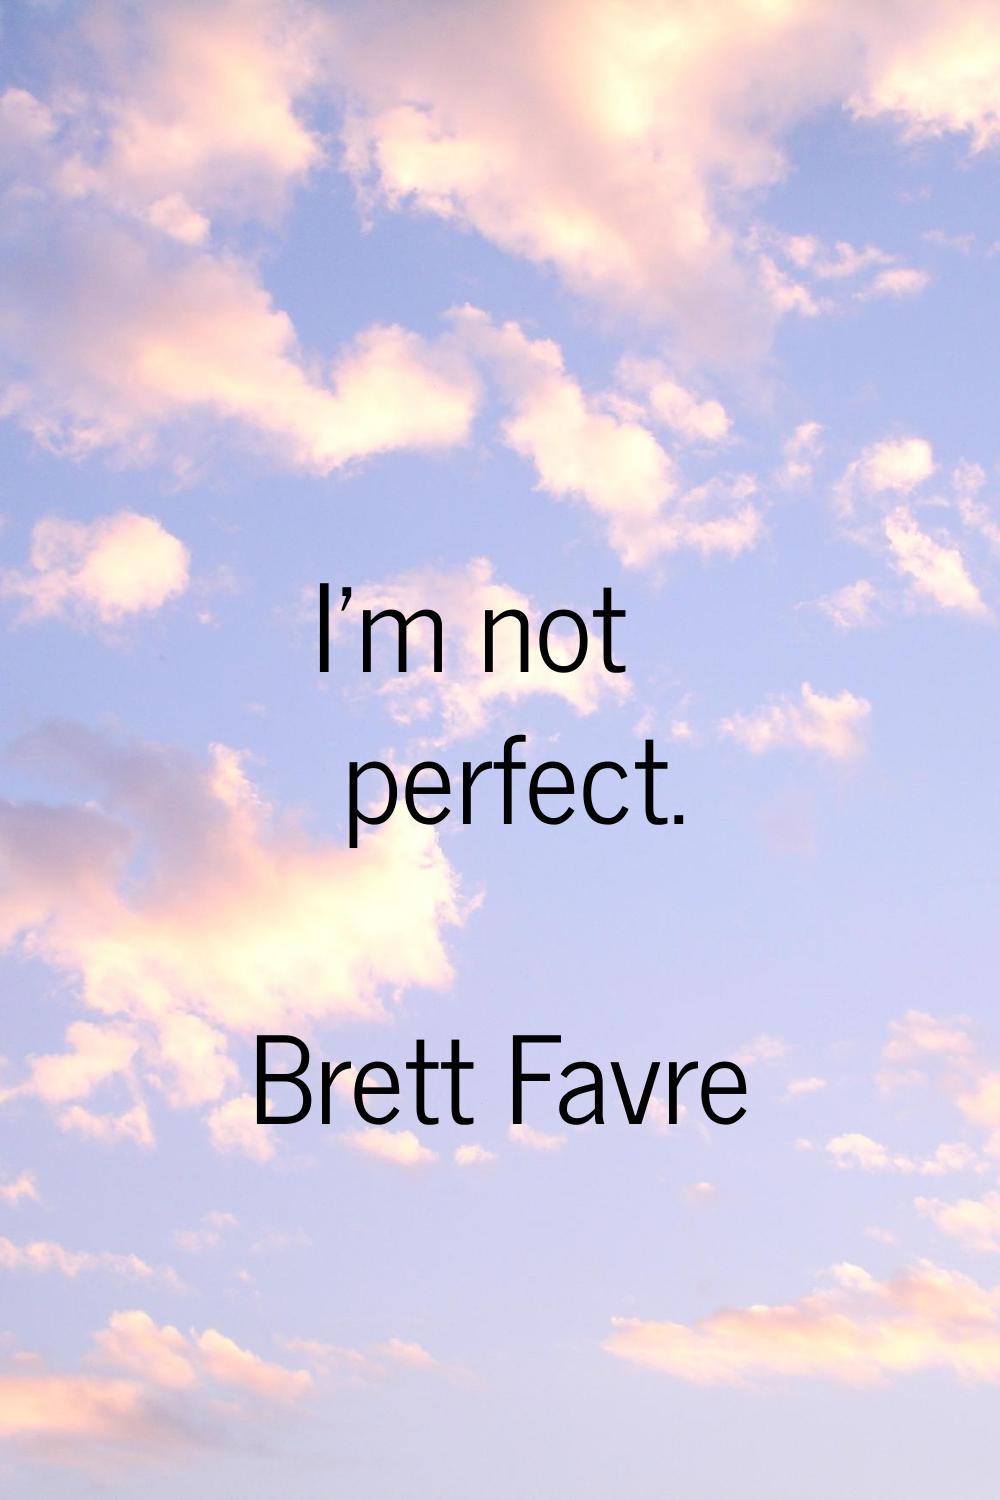 I'm not perfect.